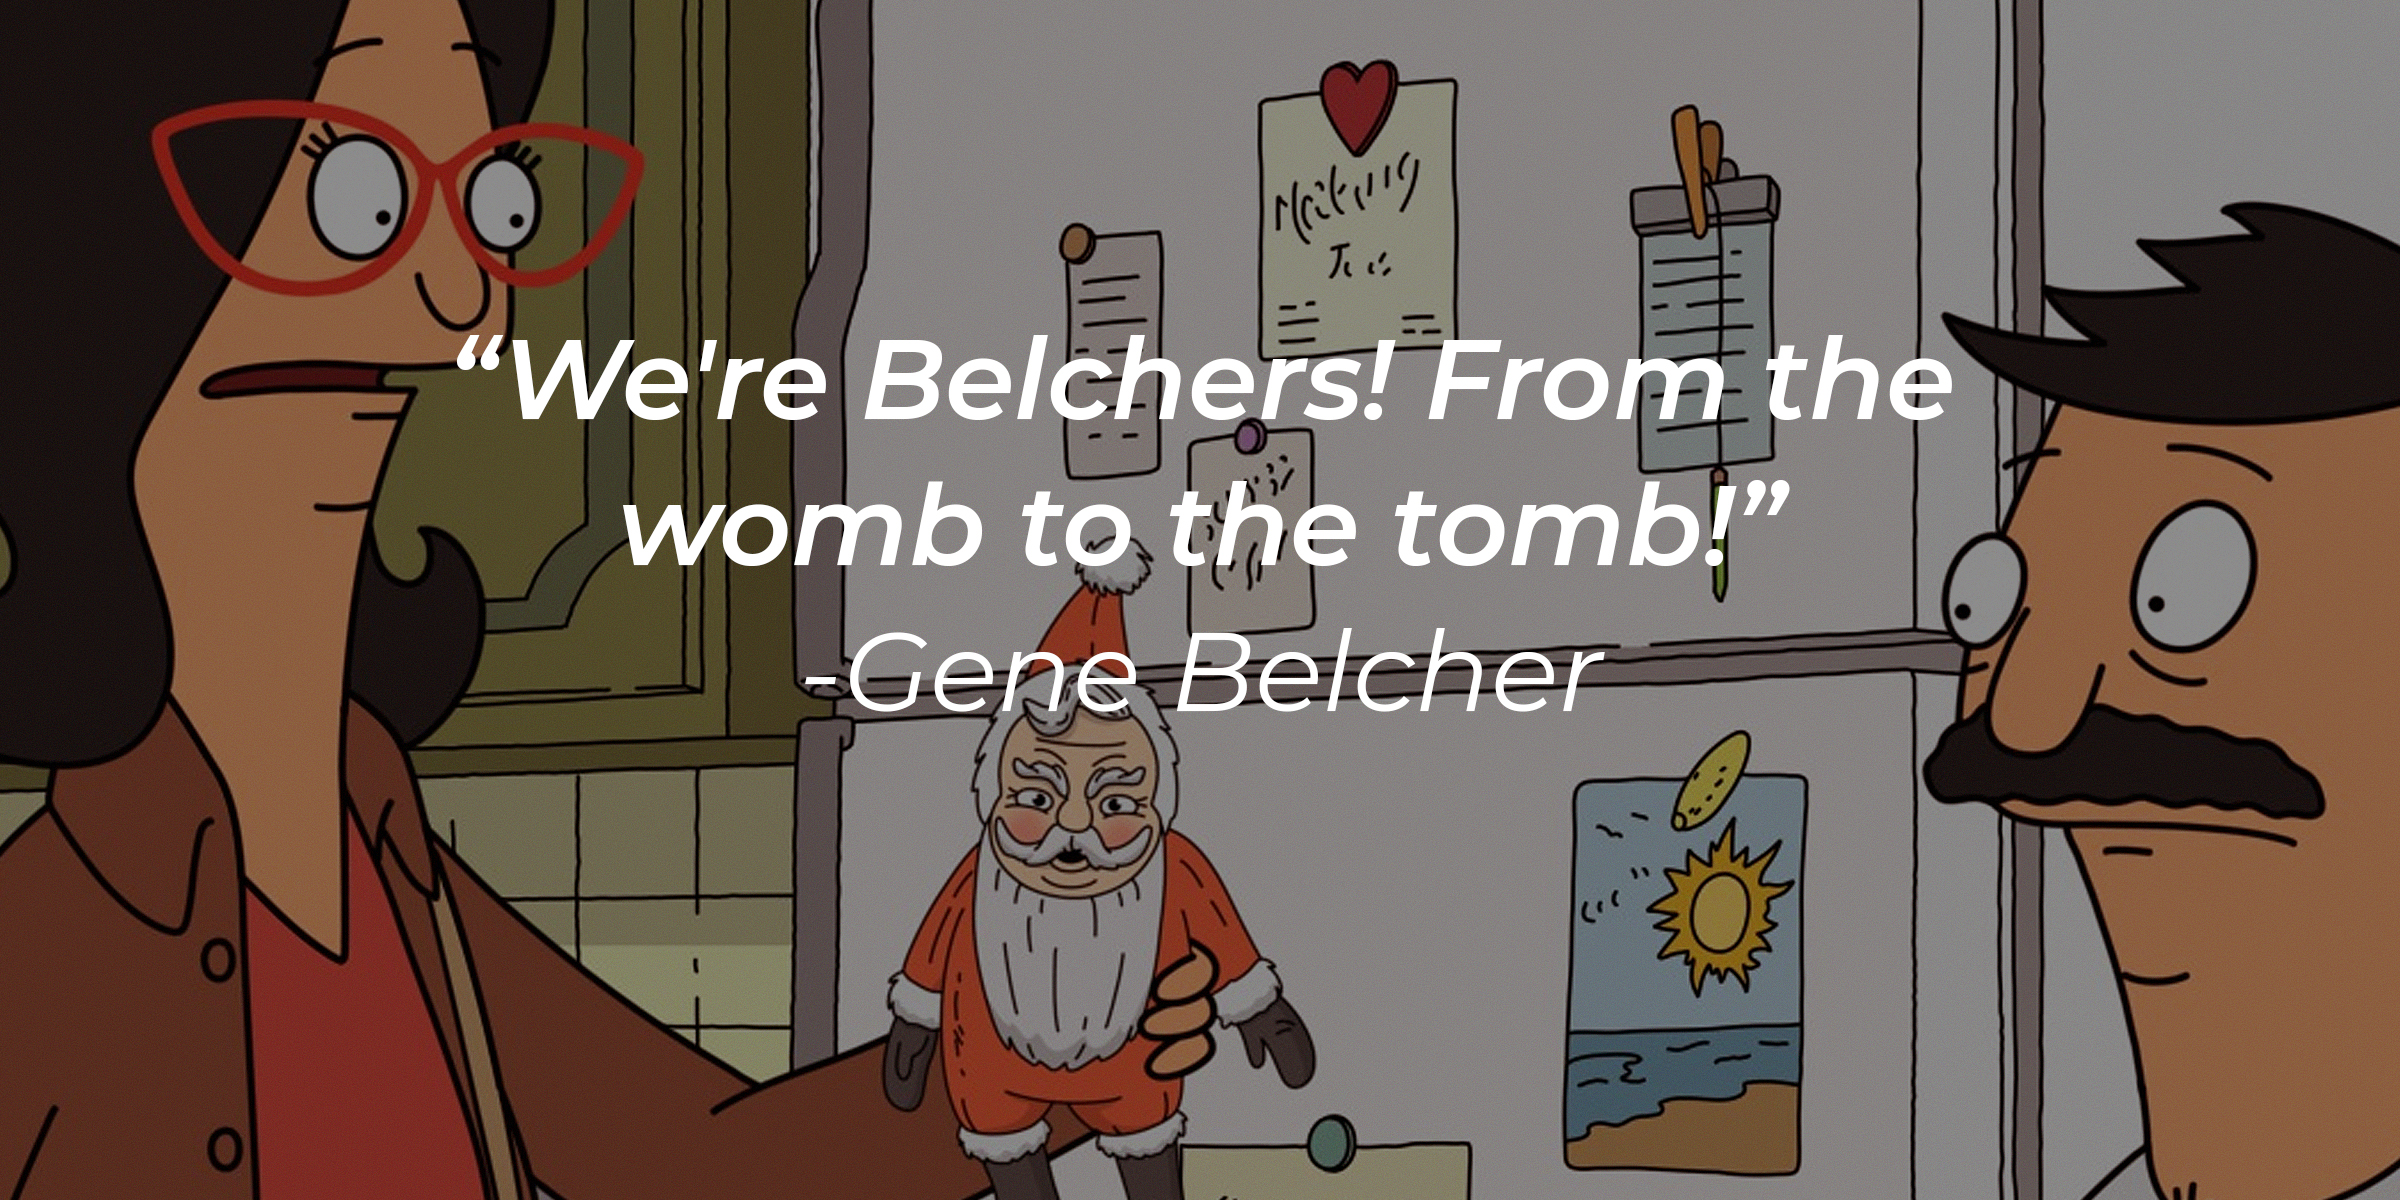 A photo of Bob and Linda with Gene Belcher's quote: "We're Belchers! From the womb to the tomb!" | Source: facebook.com/BobsBurgers